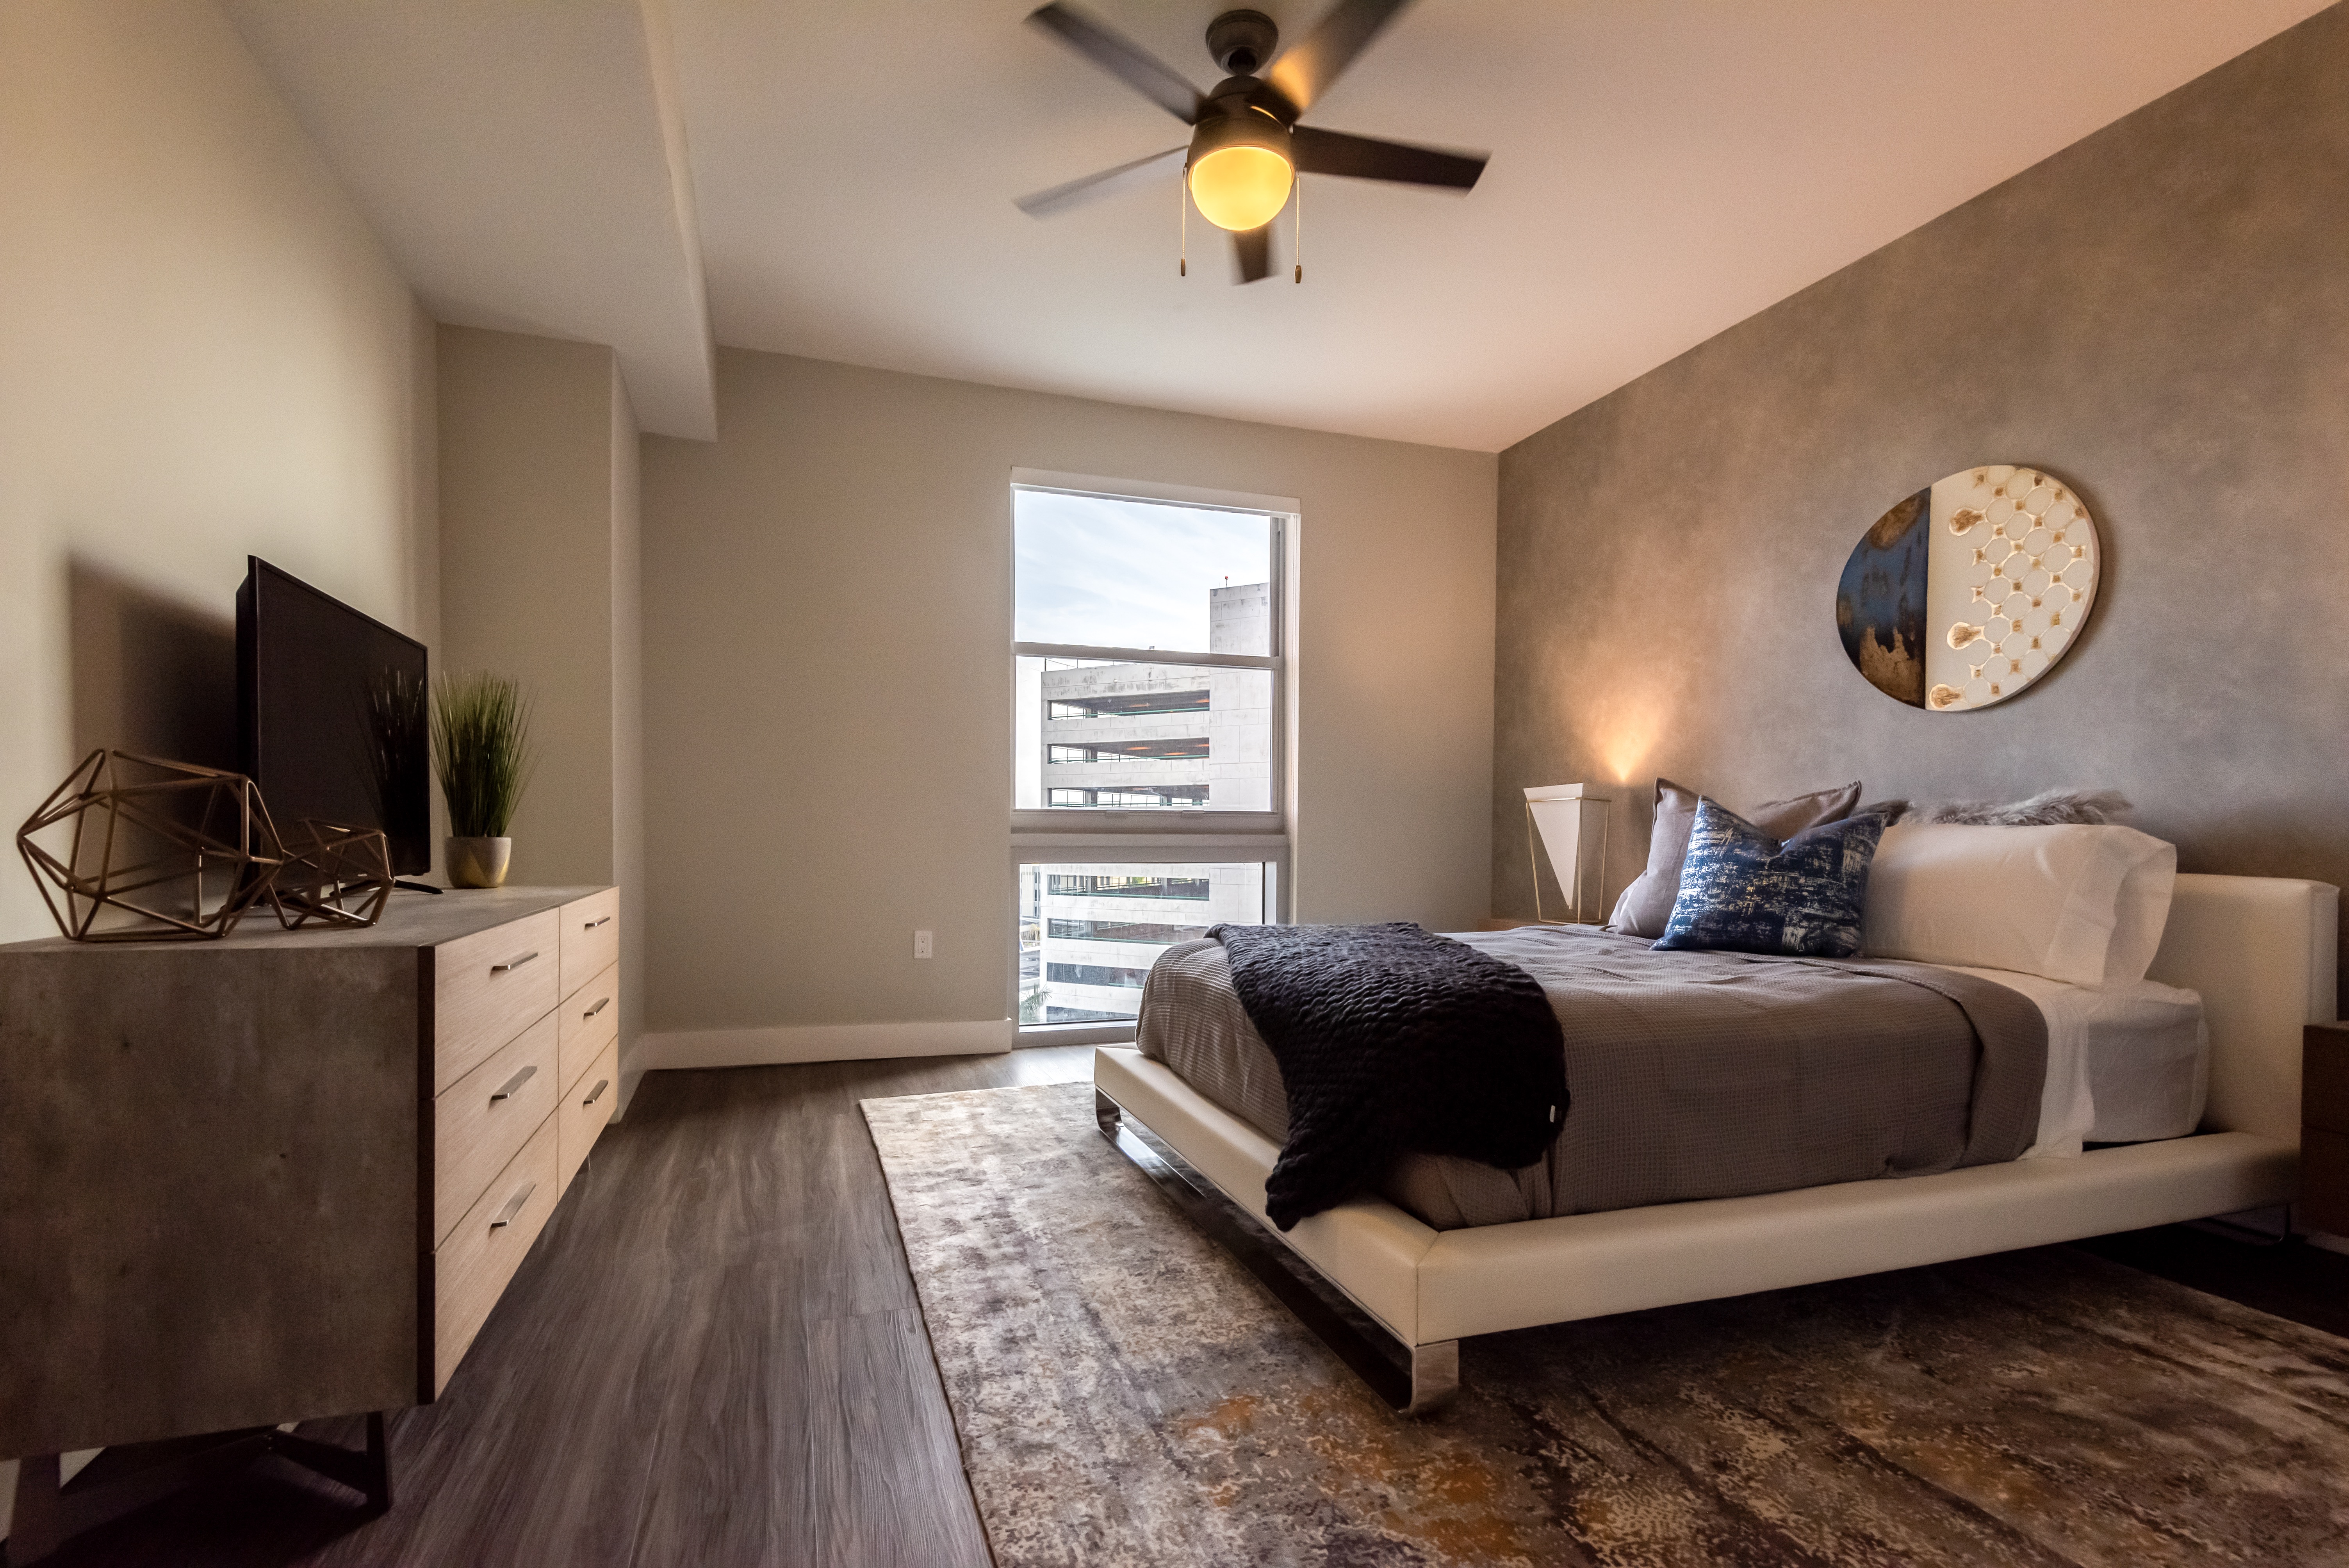 Modern apartment bedroom with king sized bed and ceiling fan